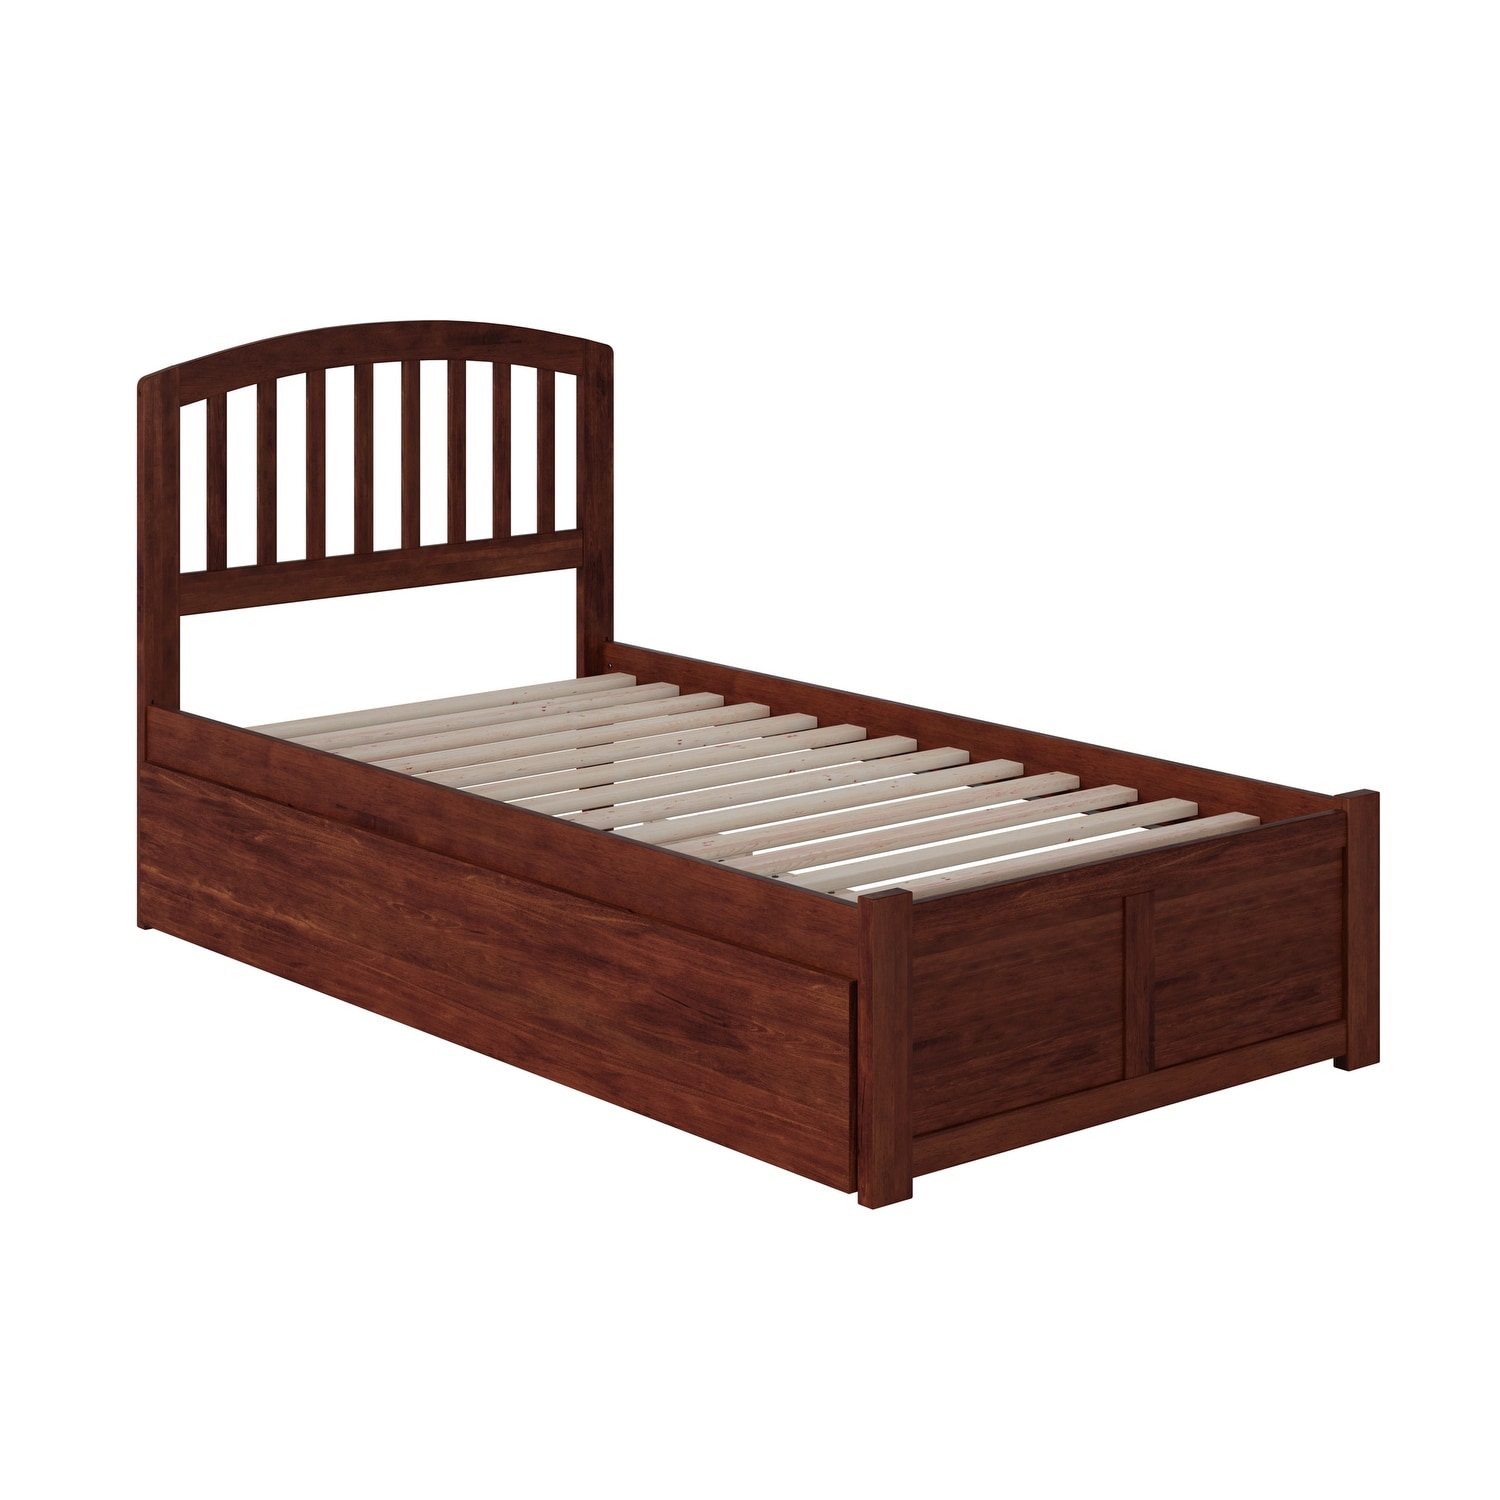 extra long twin bed frame length